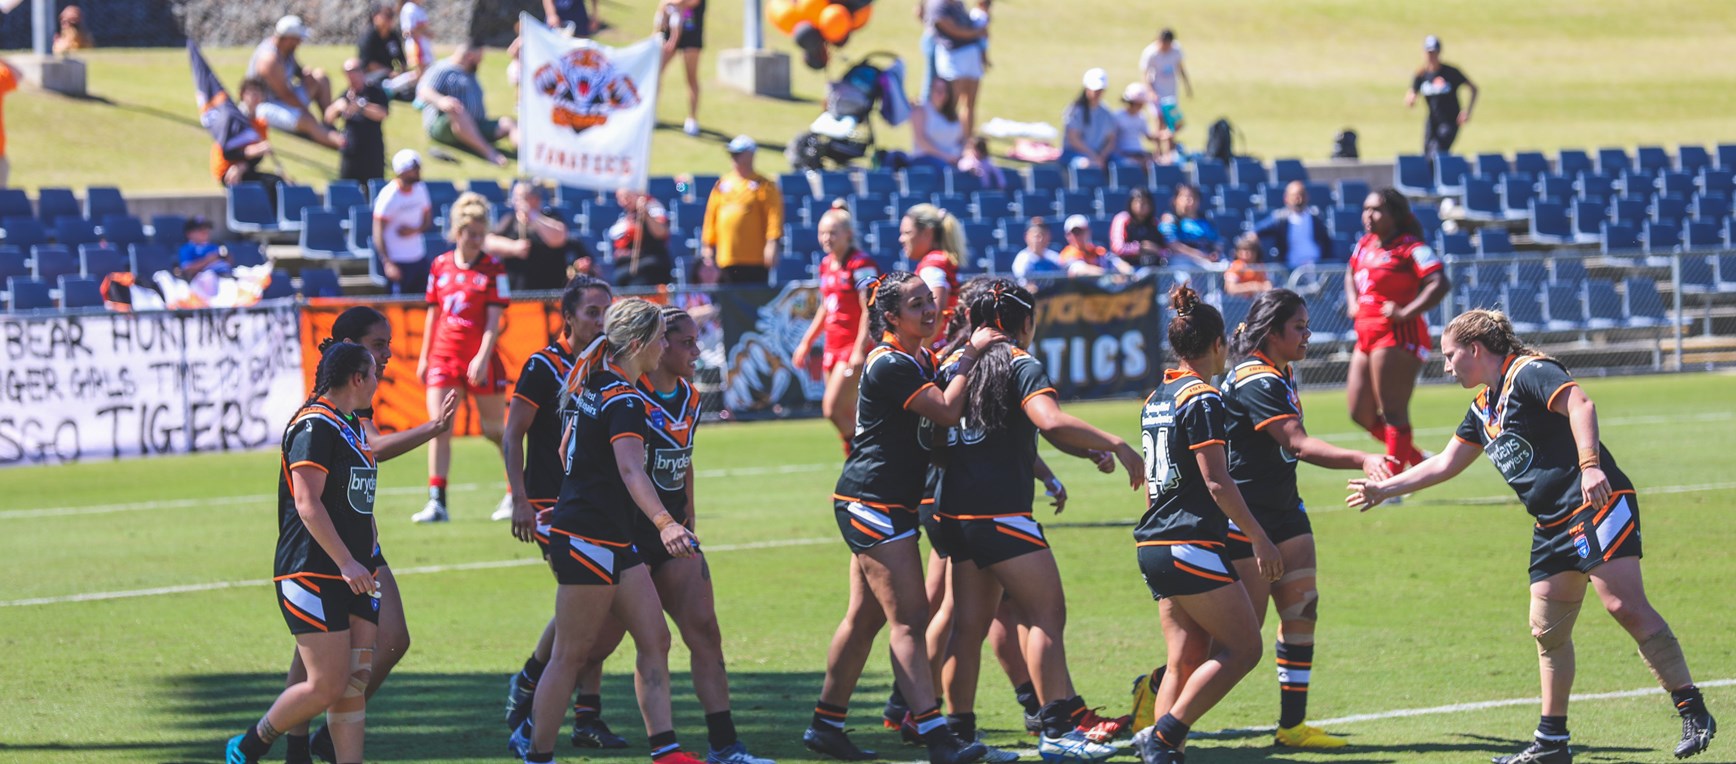 Wests Tigers women put up strong show against Bears